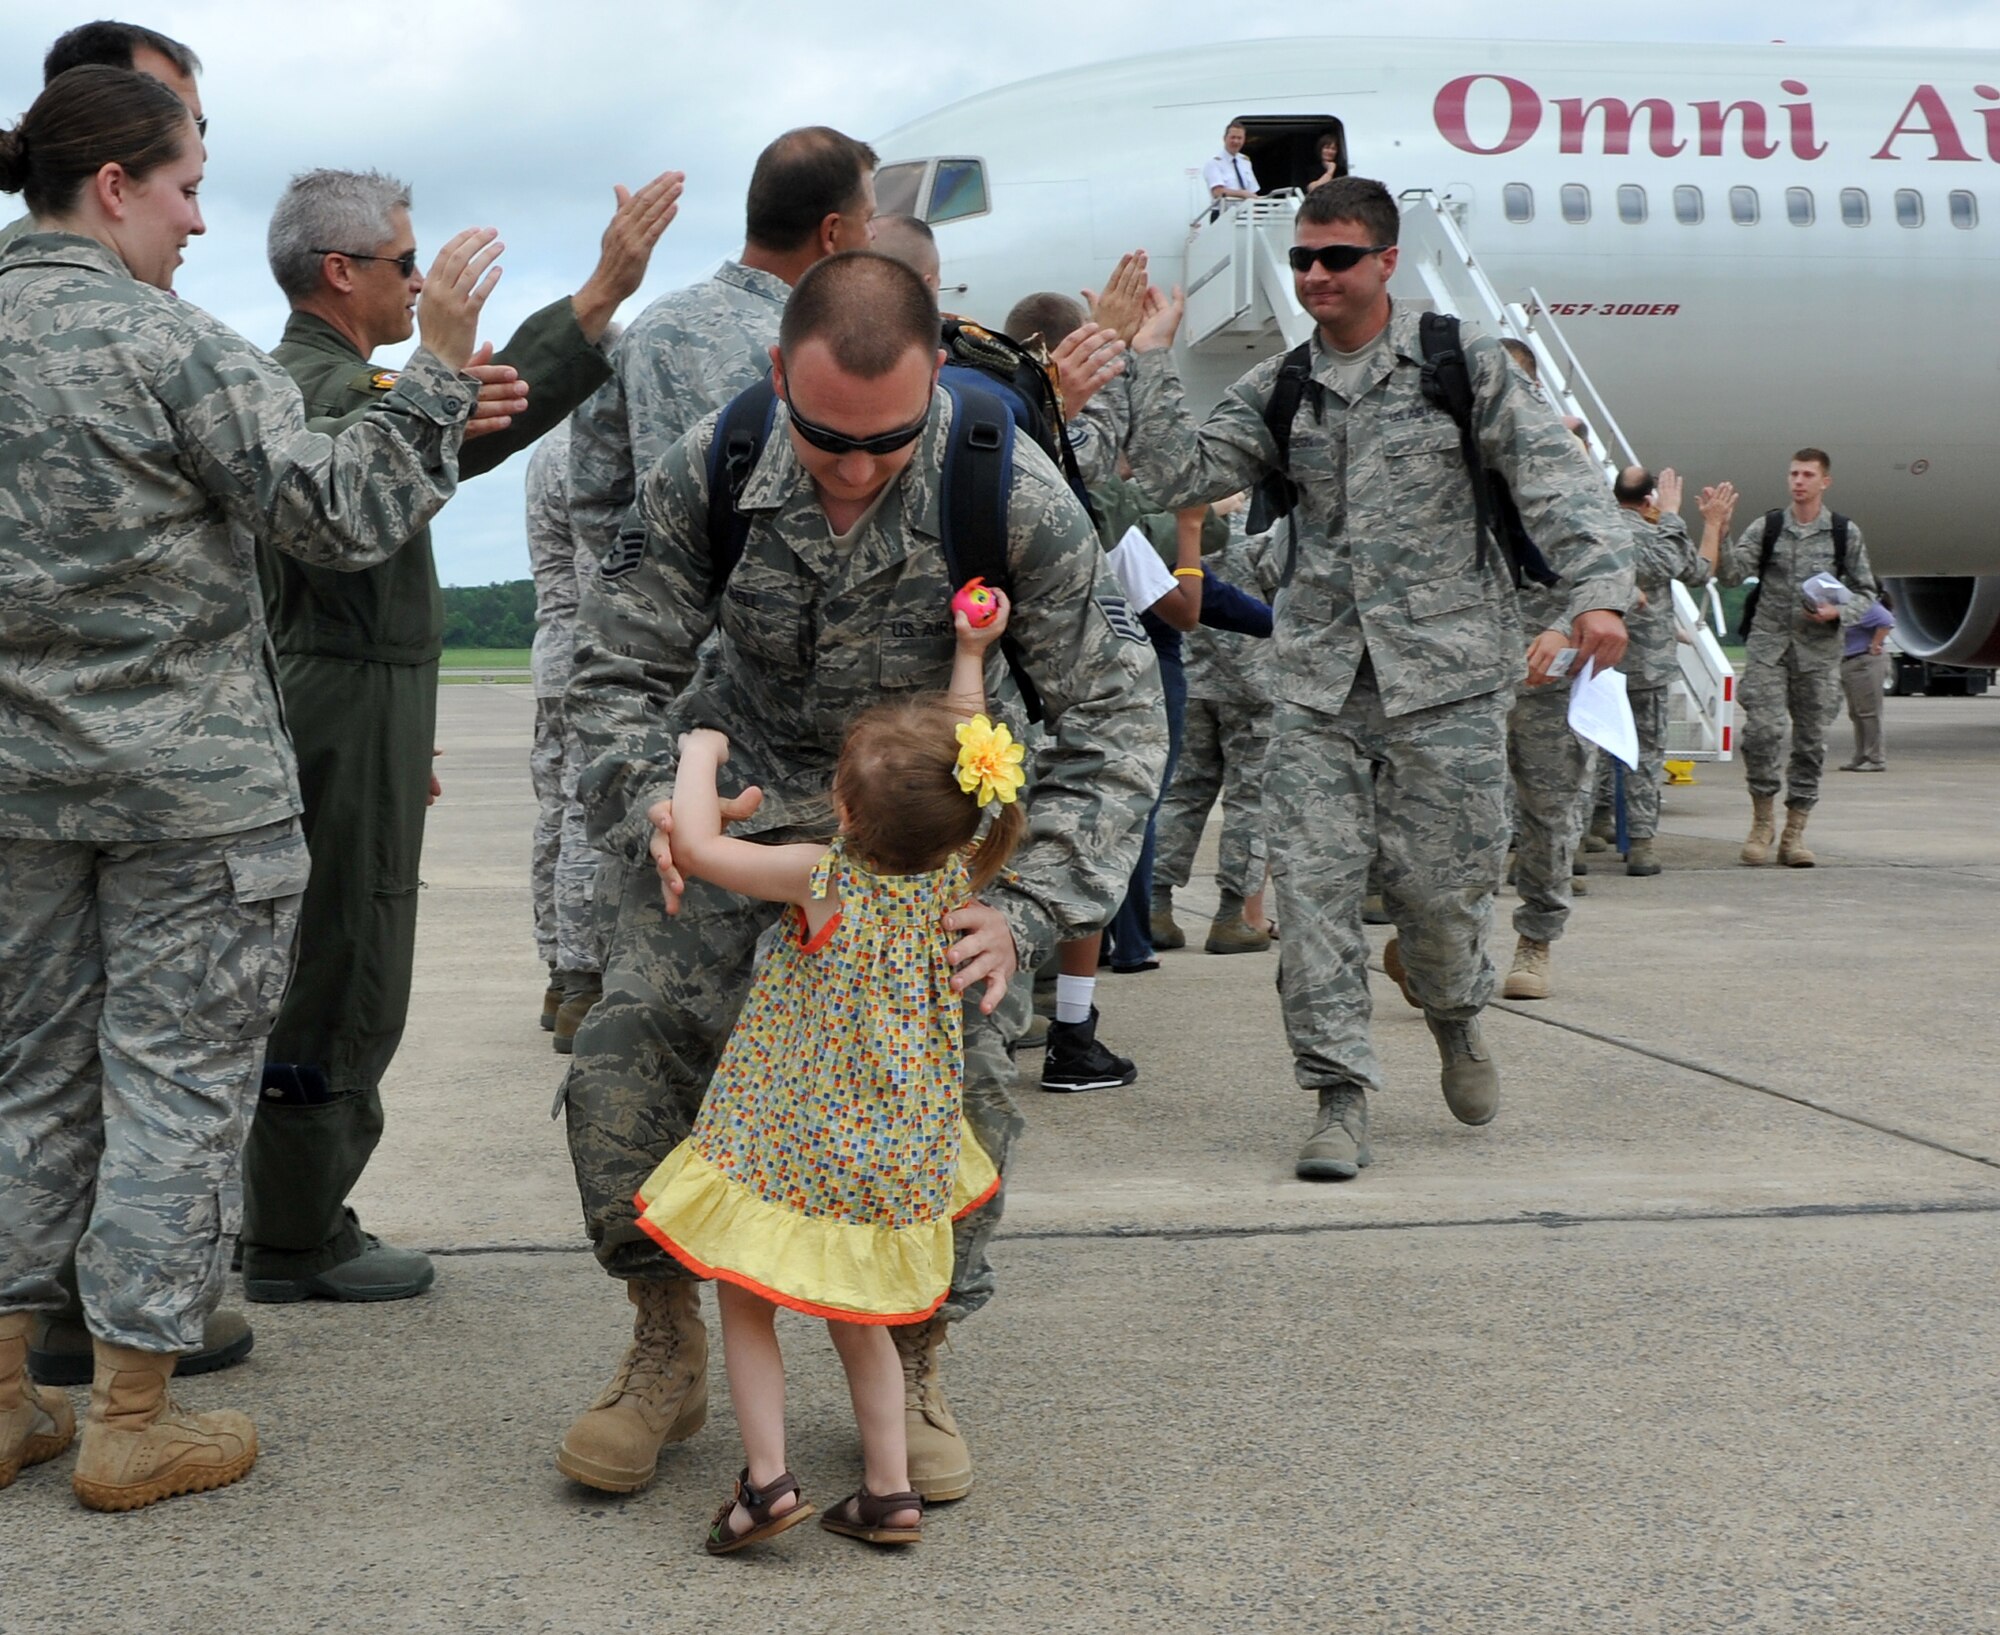 Staff Sgt. Louis Bell, 19th Aircraft Maintenance Squadron crew chief, is greeted by daughter, Anjulie, on the base flightline May 21, 2011, at Little Rock Air Force Base, Ark. Nearly 200 Team Little Rock Airmen reunited with family members and friends Saturday after returning from months of deployments supporting operations in Southwest Asia. (U.S. Air Force photo/Staff Sgt. Chris Willis)